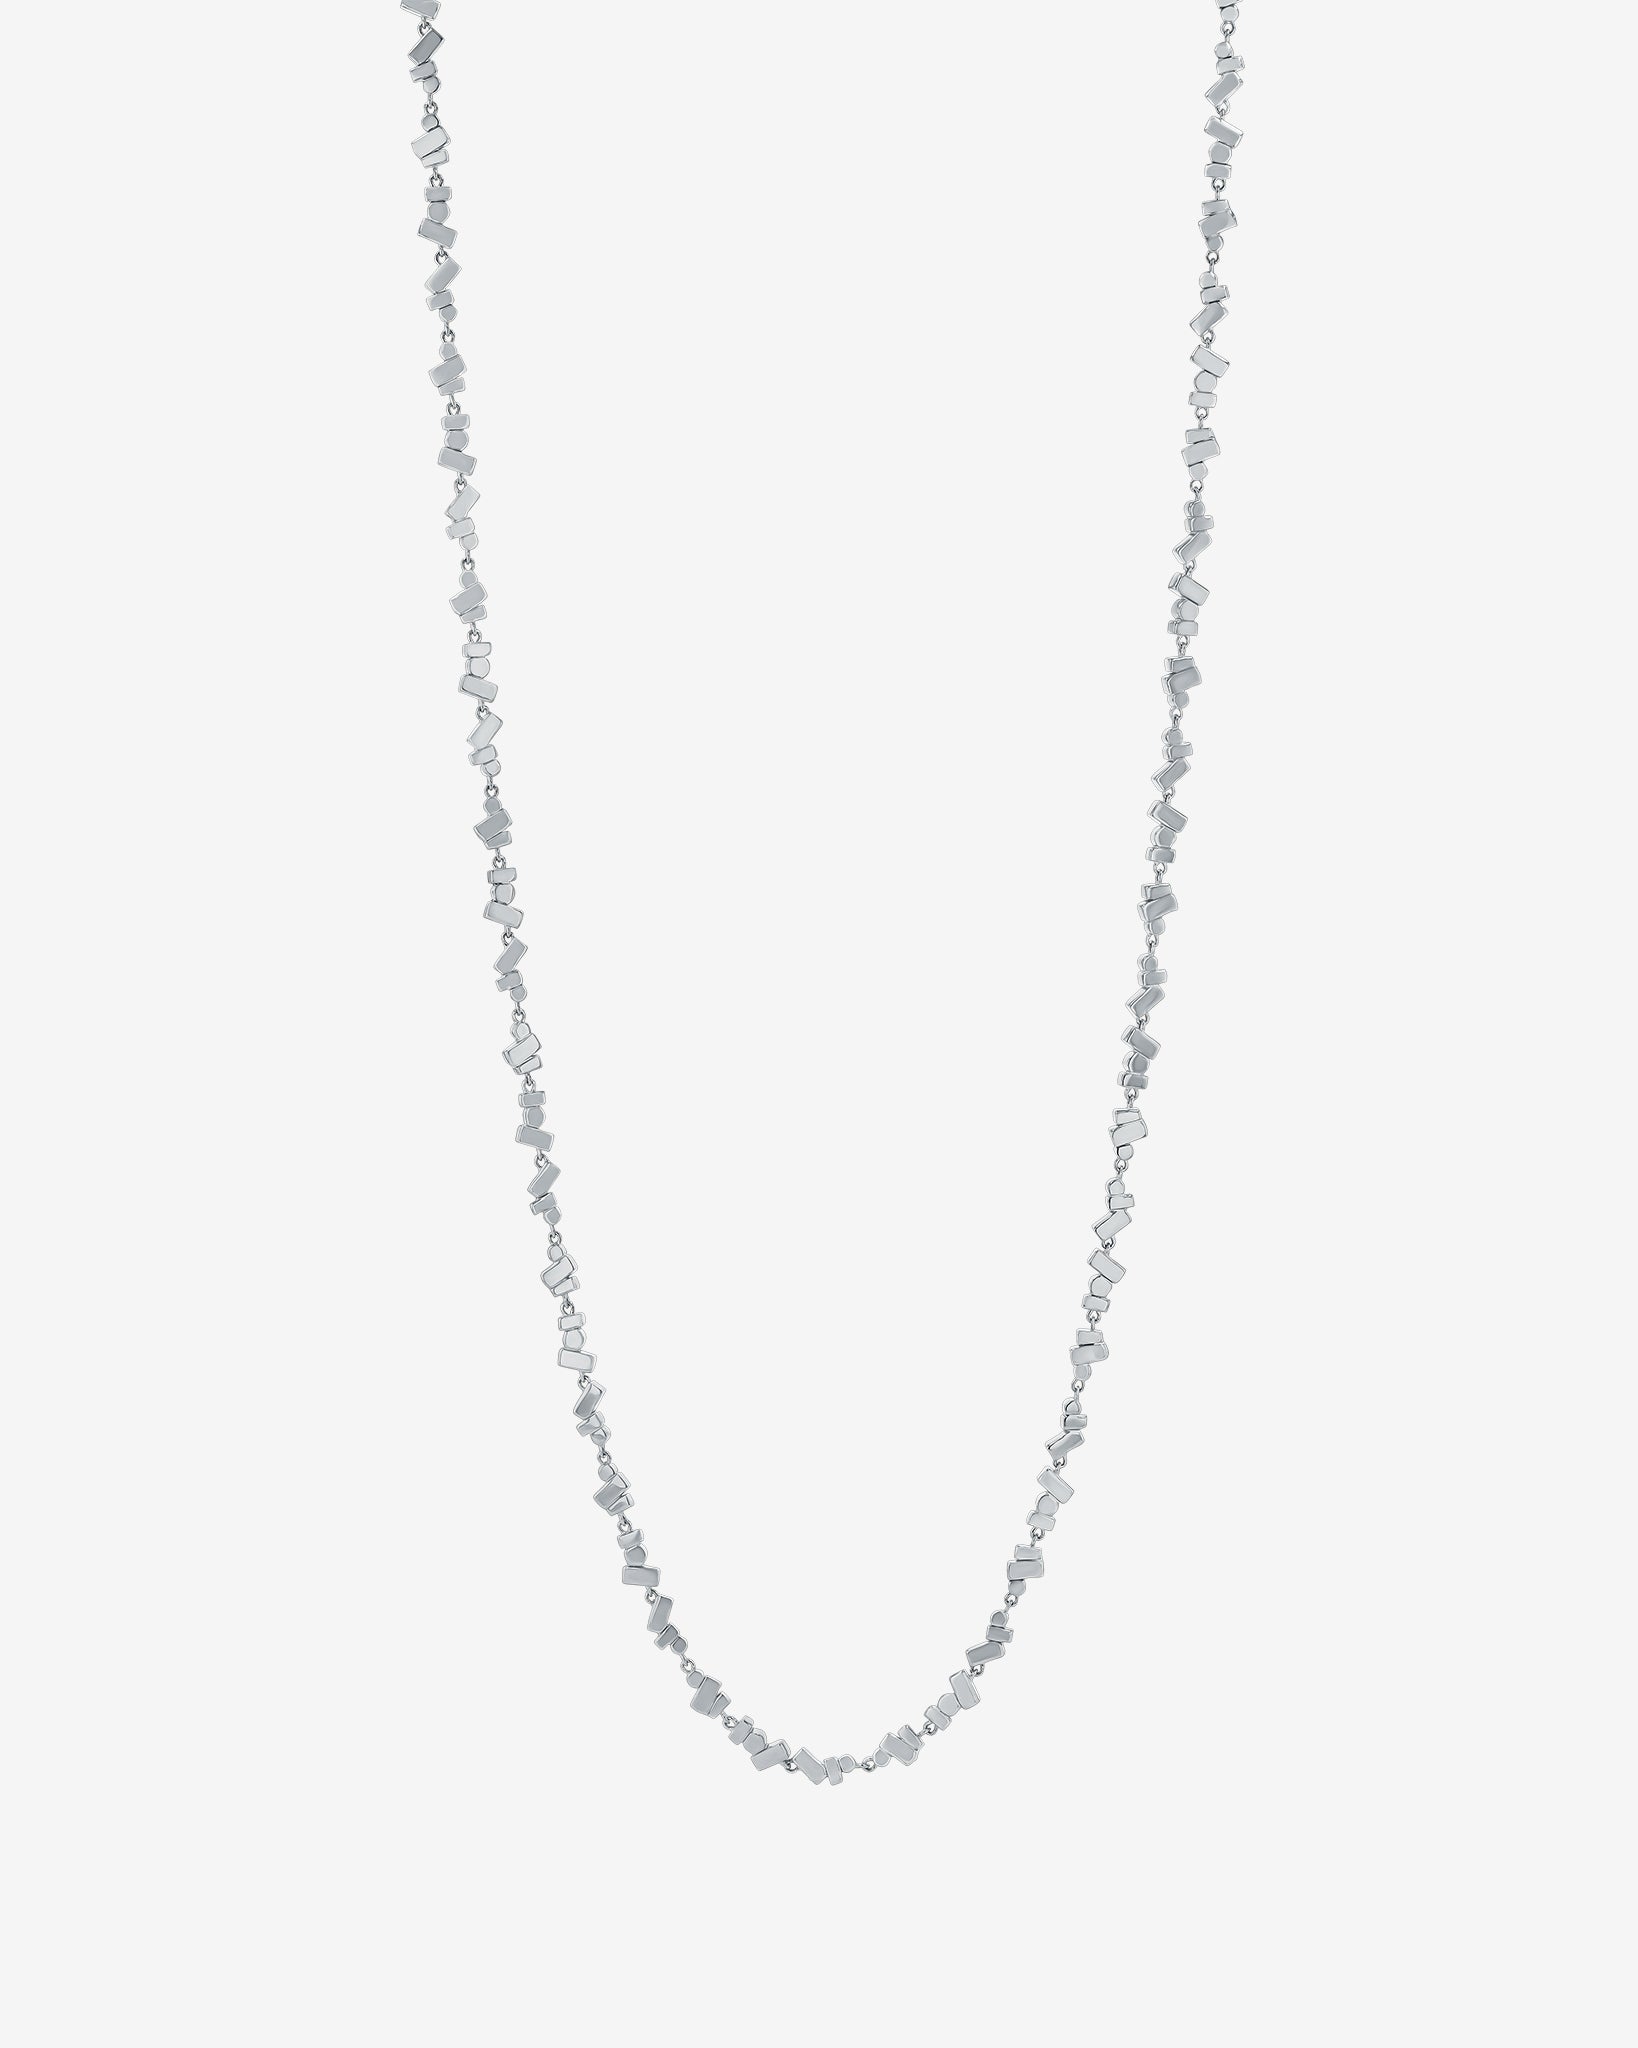 Suzanne Kalan Golden Cluster 36" Inch Tennis Necklace in 18k white gold